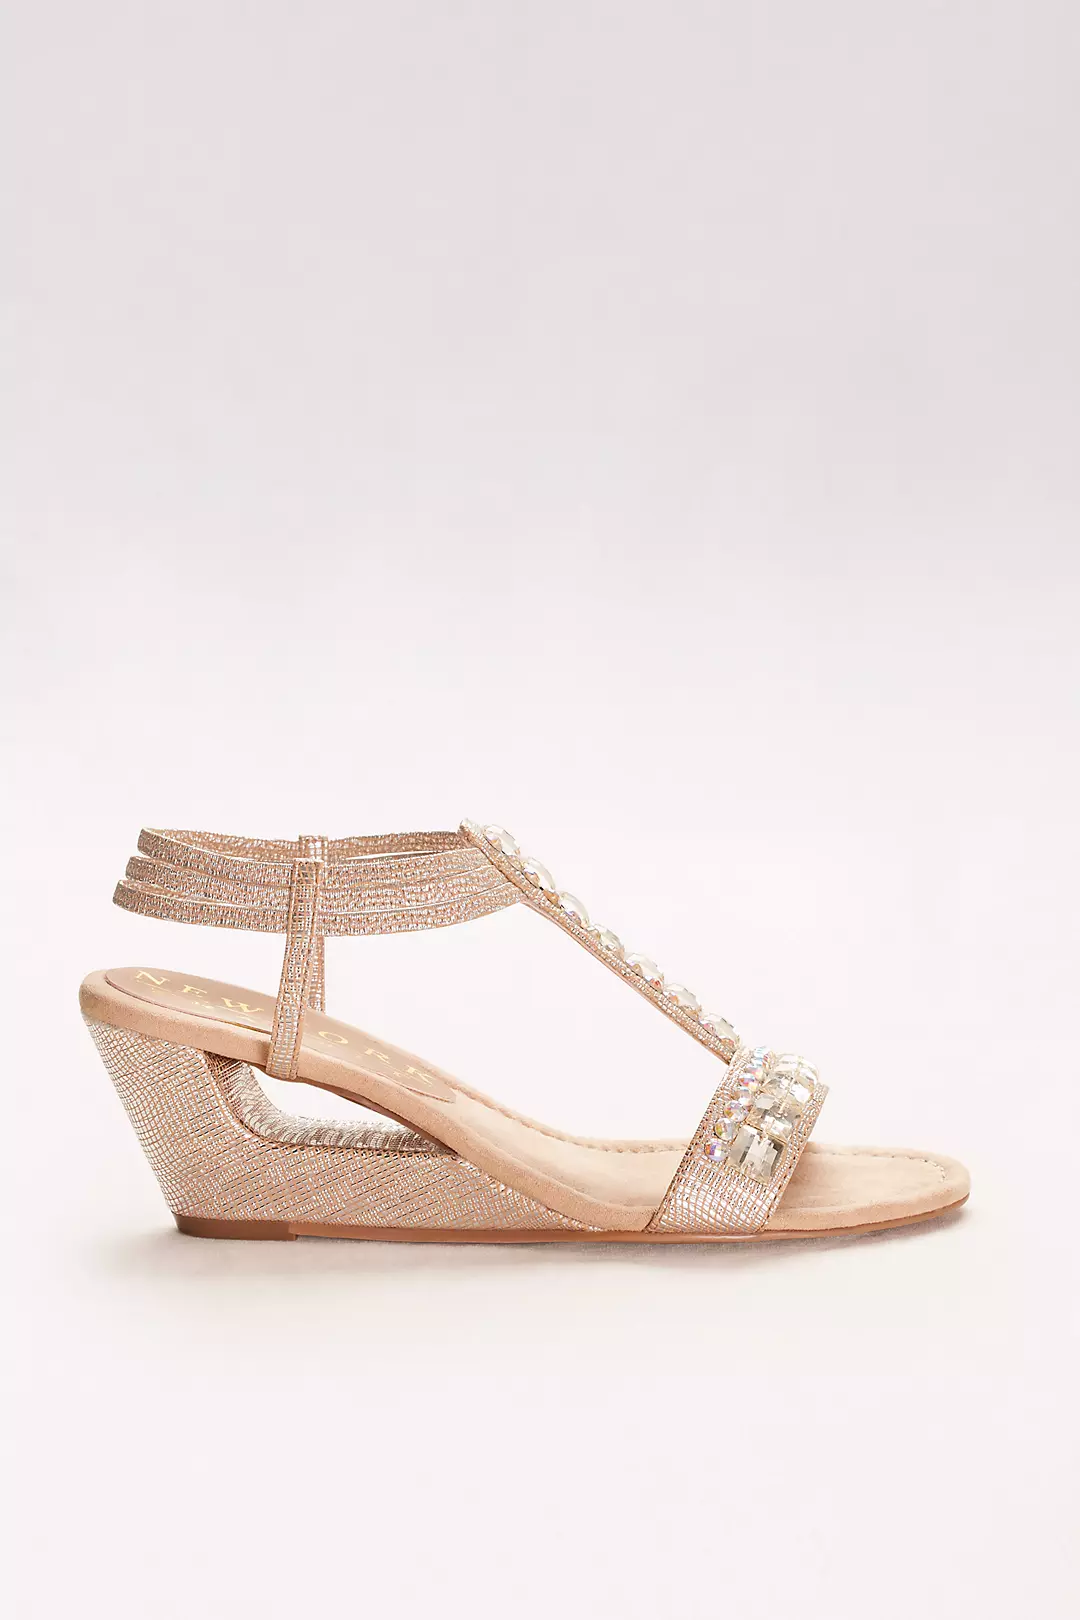 Double Crystal T-Strap Wedges Image 3